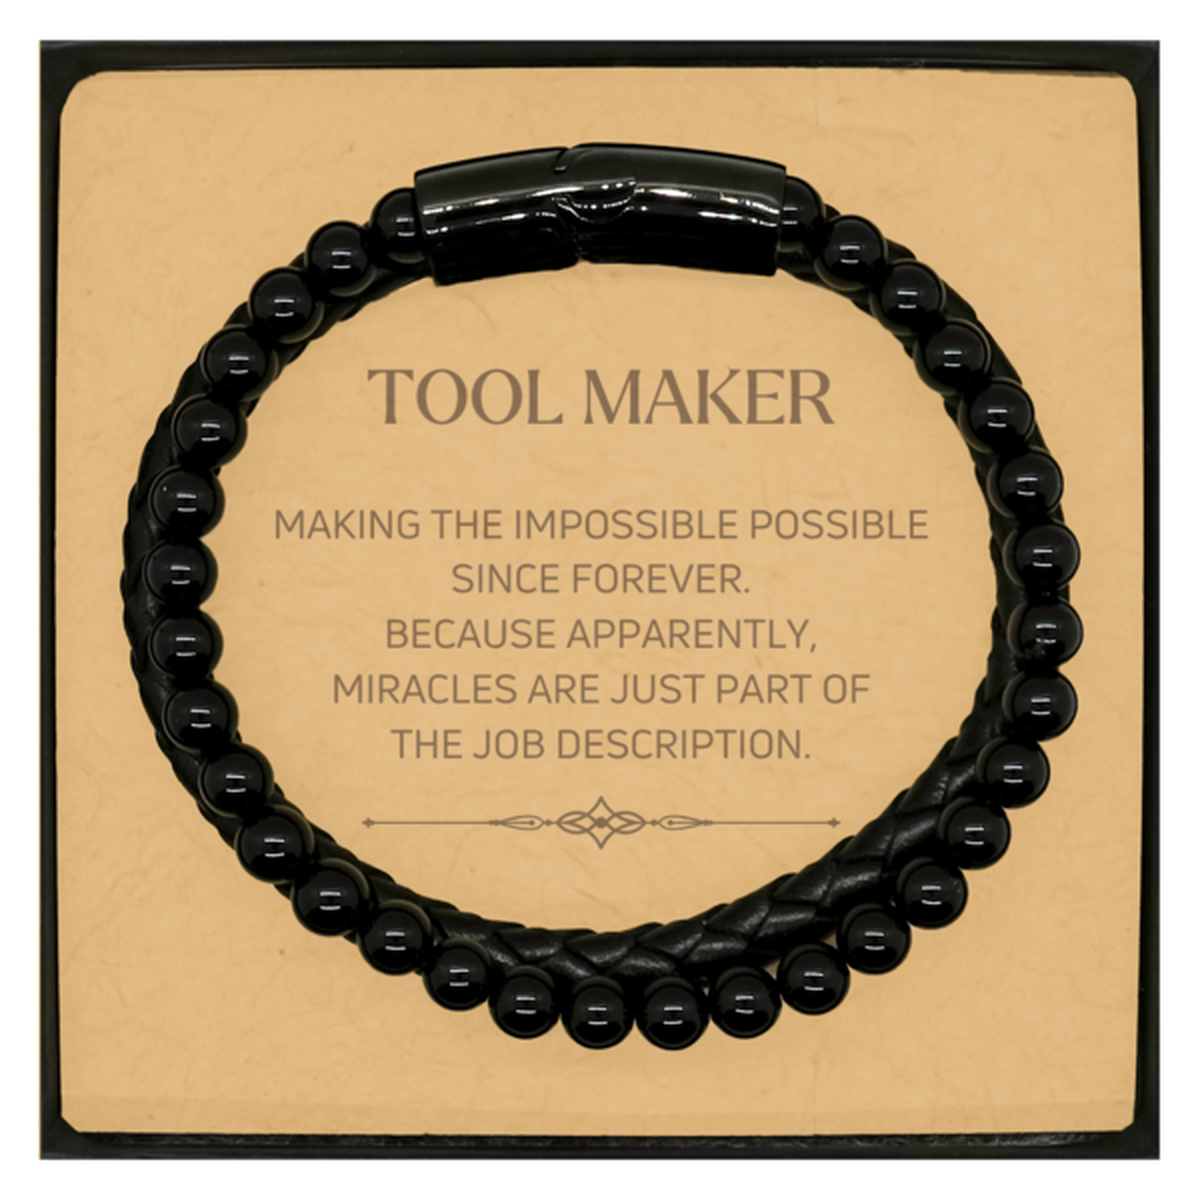 Funny Tool Maker Gifts, Miracles are just part of the job description, Inspirational Birthday Christmas Stone Leather Bracelets For Tool Maker, Men, Women, Coworkers, Friends, Boss